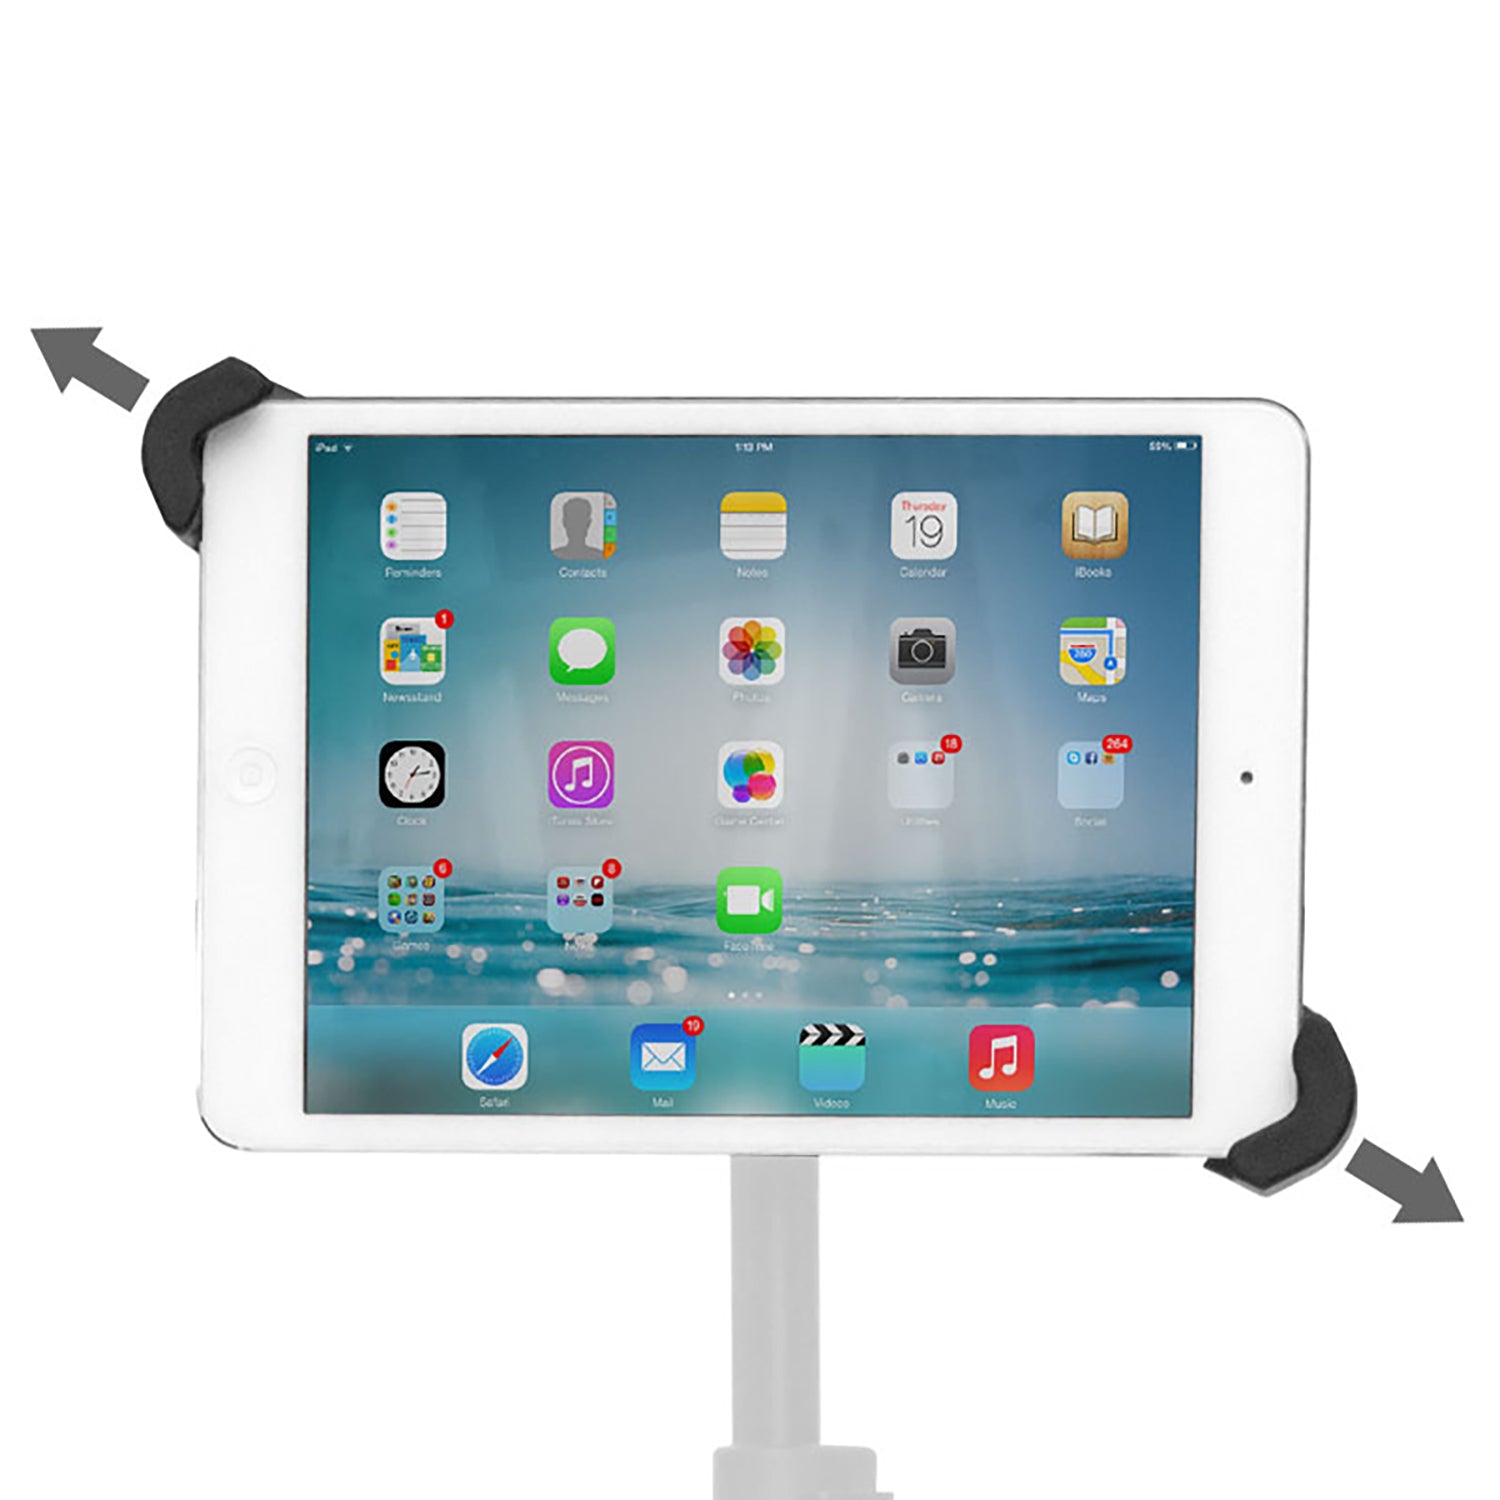 Grifiti Nootle Universal Tablet Mount Small to Standard iPads and Tablets - Grifiti